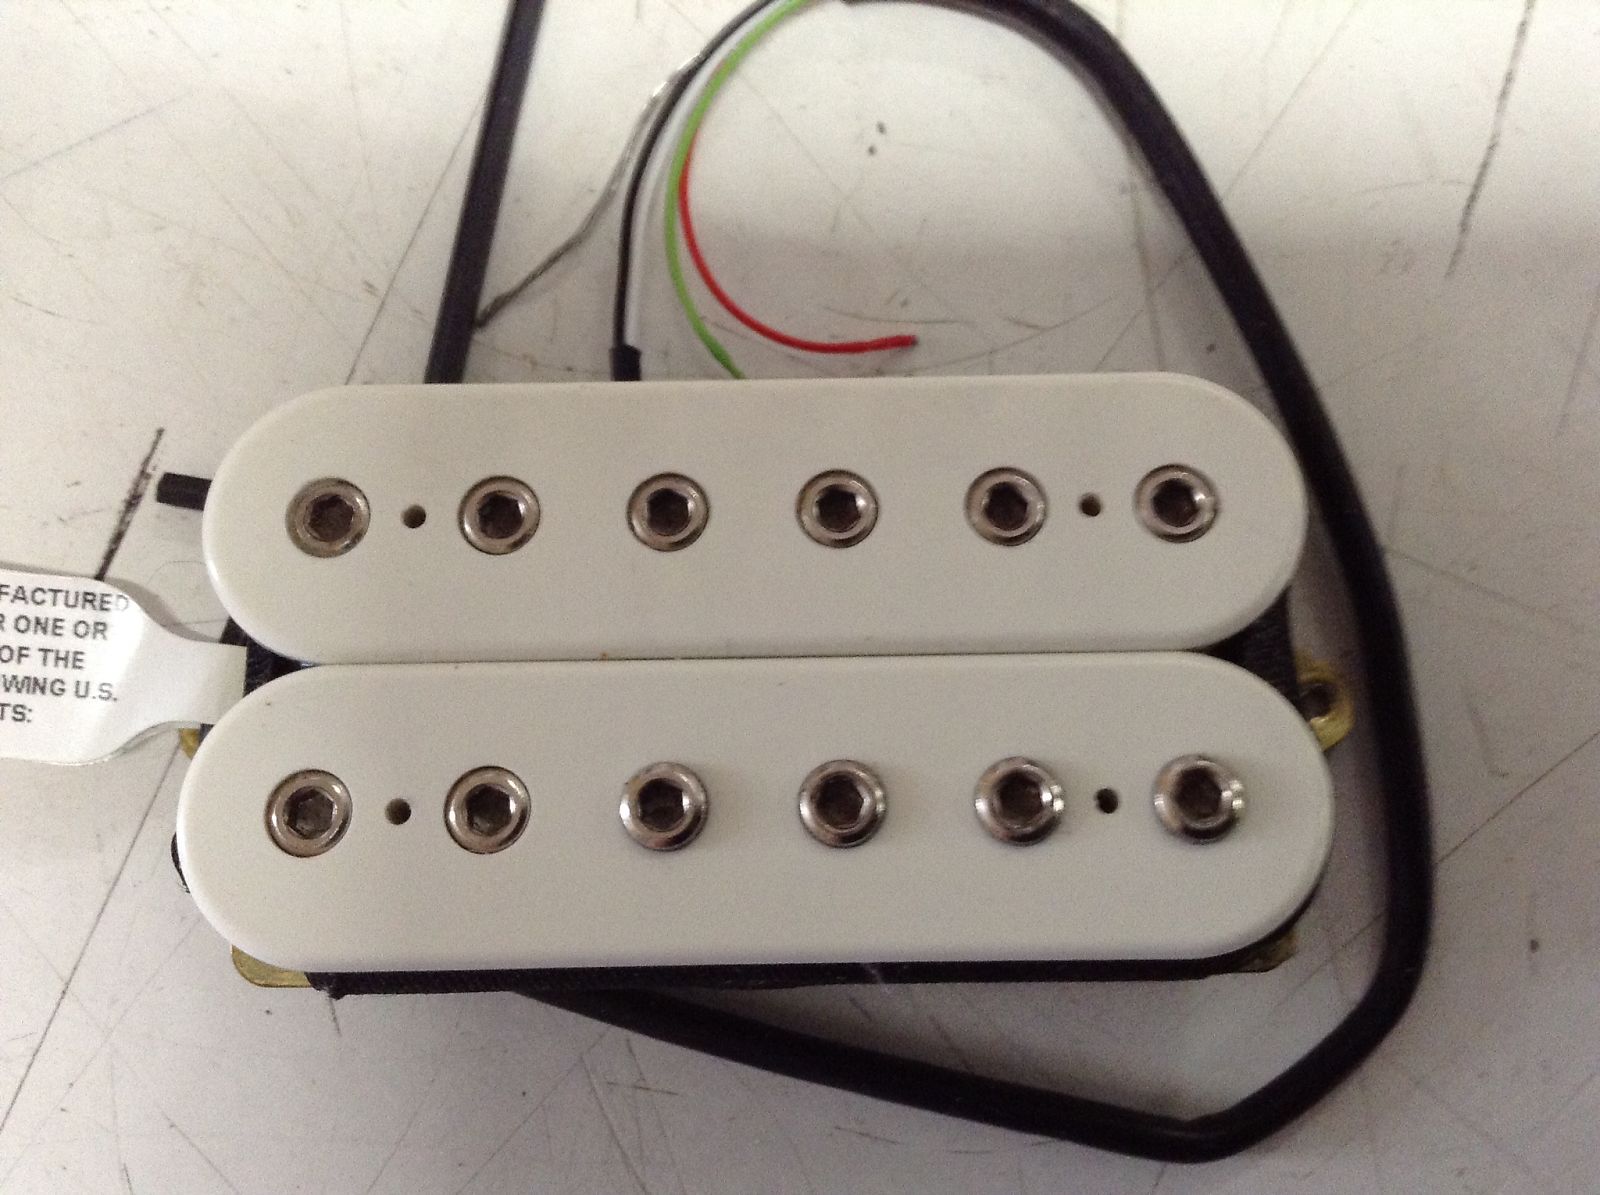 DiMarzio DP156CR Humbucker From Hell Neck Pickup | Reverb